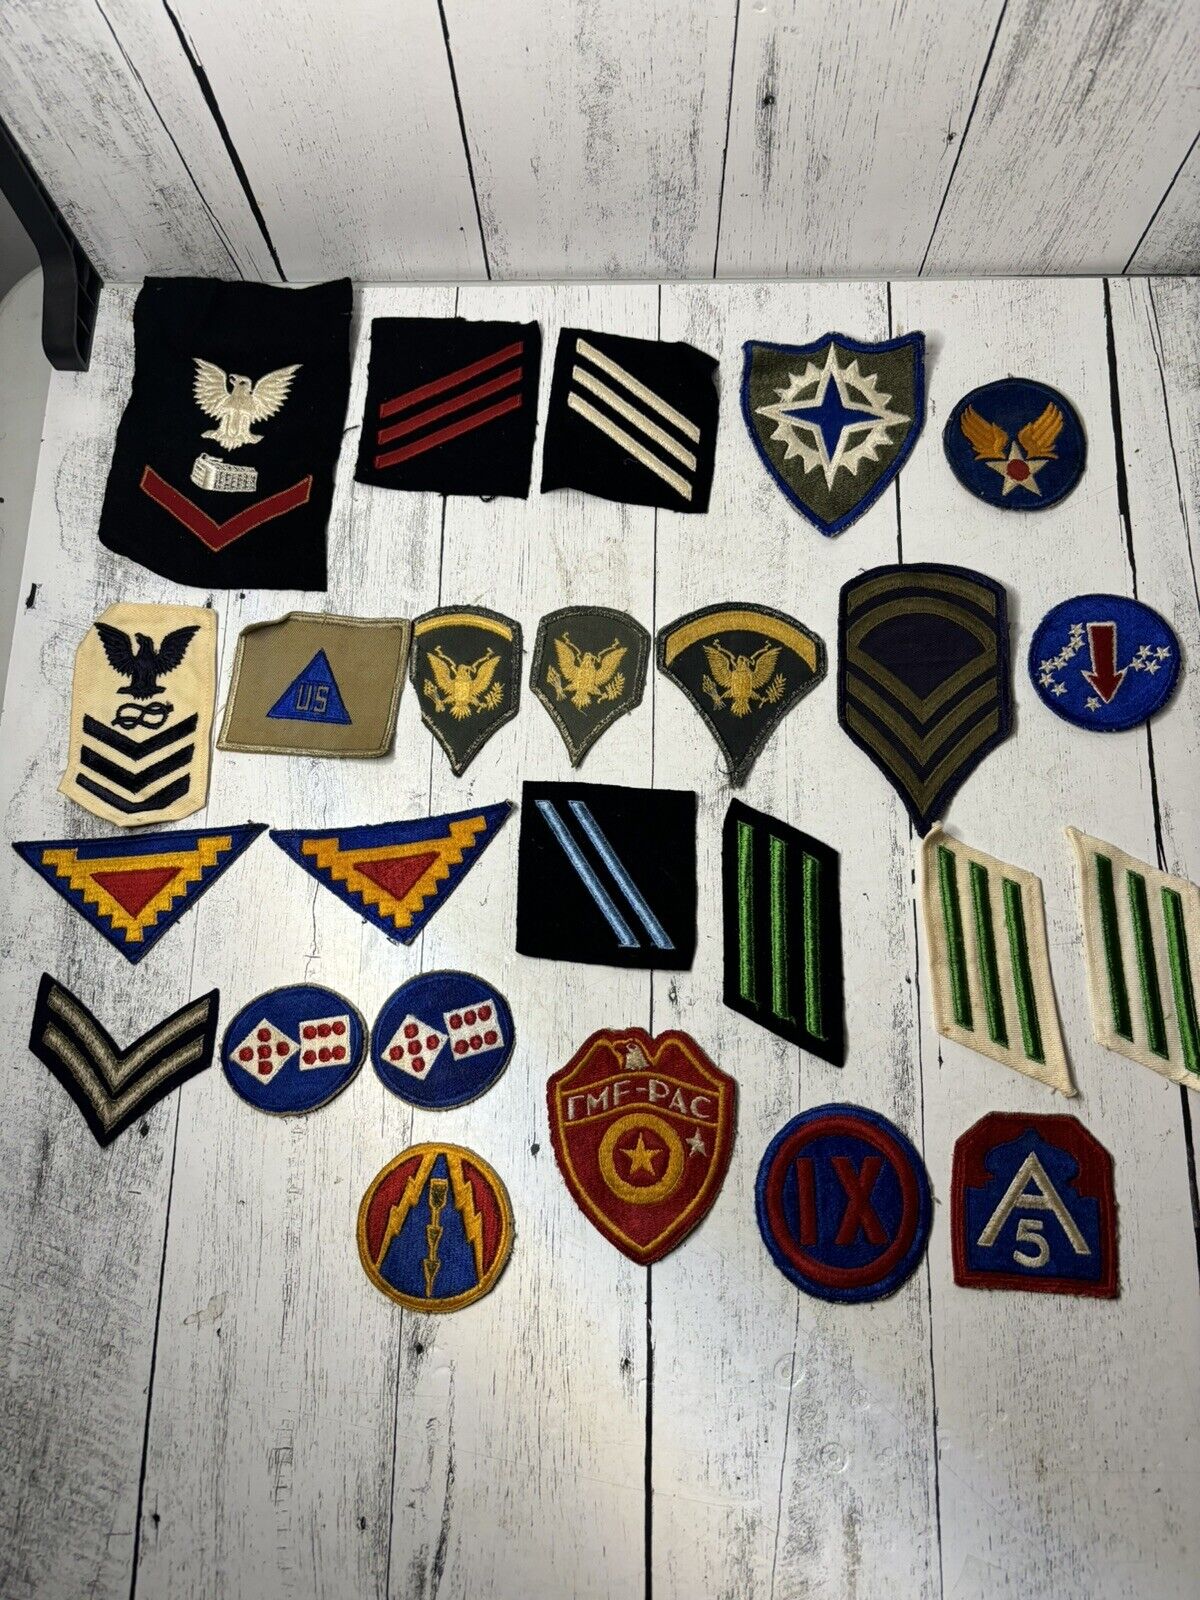 VINTAGE ESTATE WW2 Mixed US MILITARY PATCH LOT OF 26 PATCHES